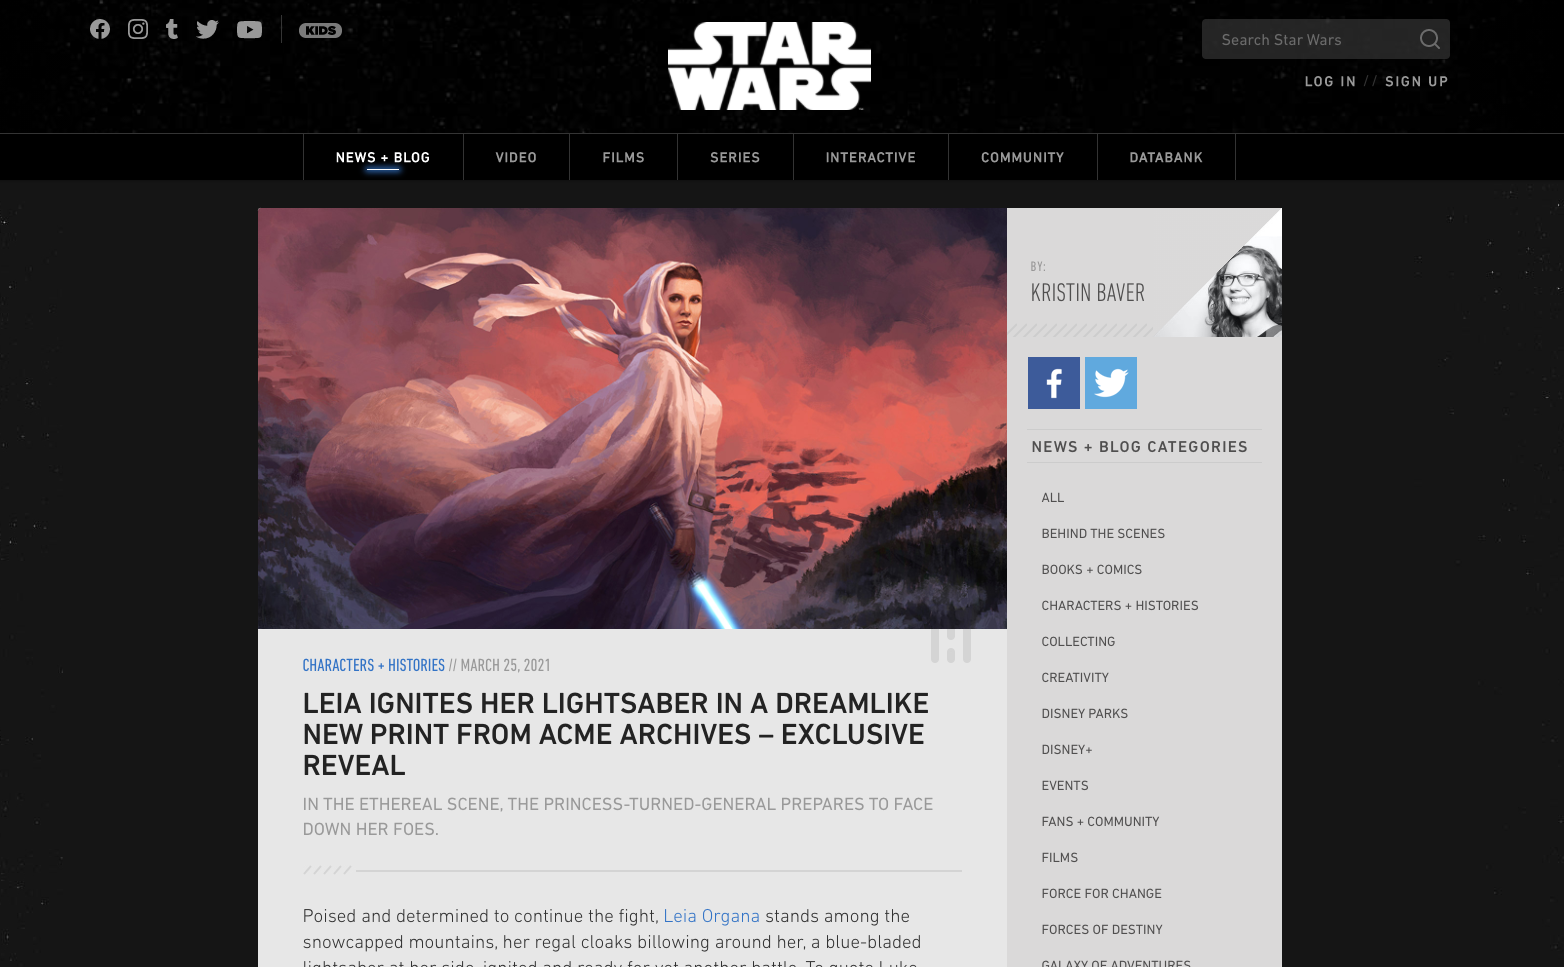 LEIA IGNITES HER LIGHTSABER IN A DREAMLIKE NEW PRINT FROM ACME ARCHIVES – EXCLUSIVE REVEAL